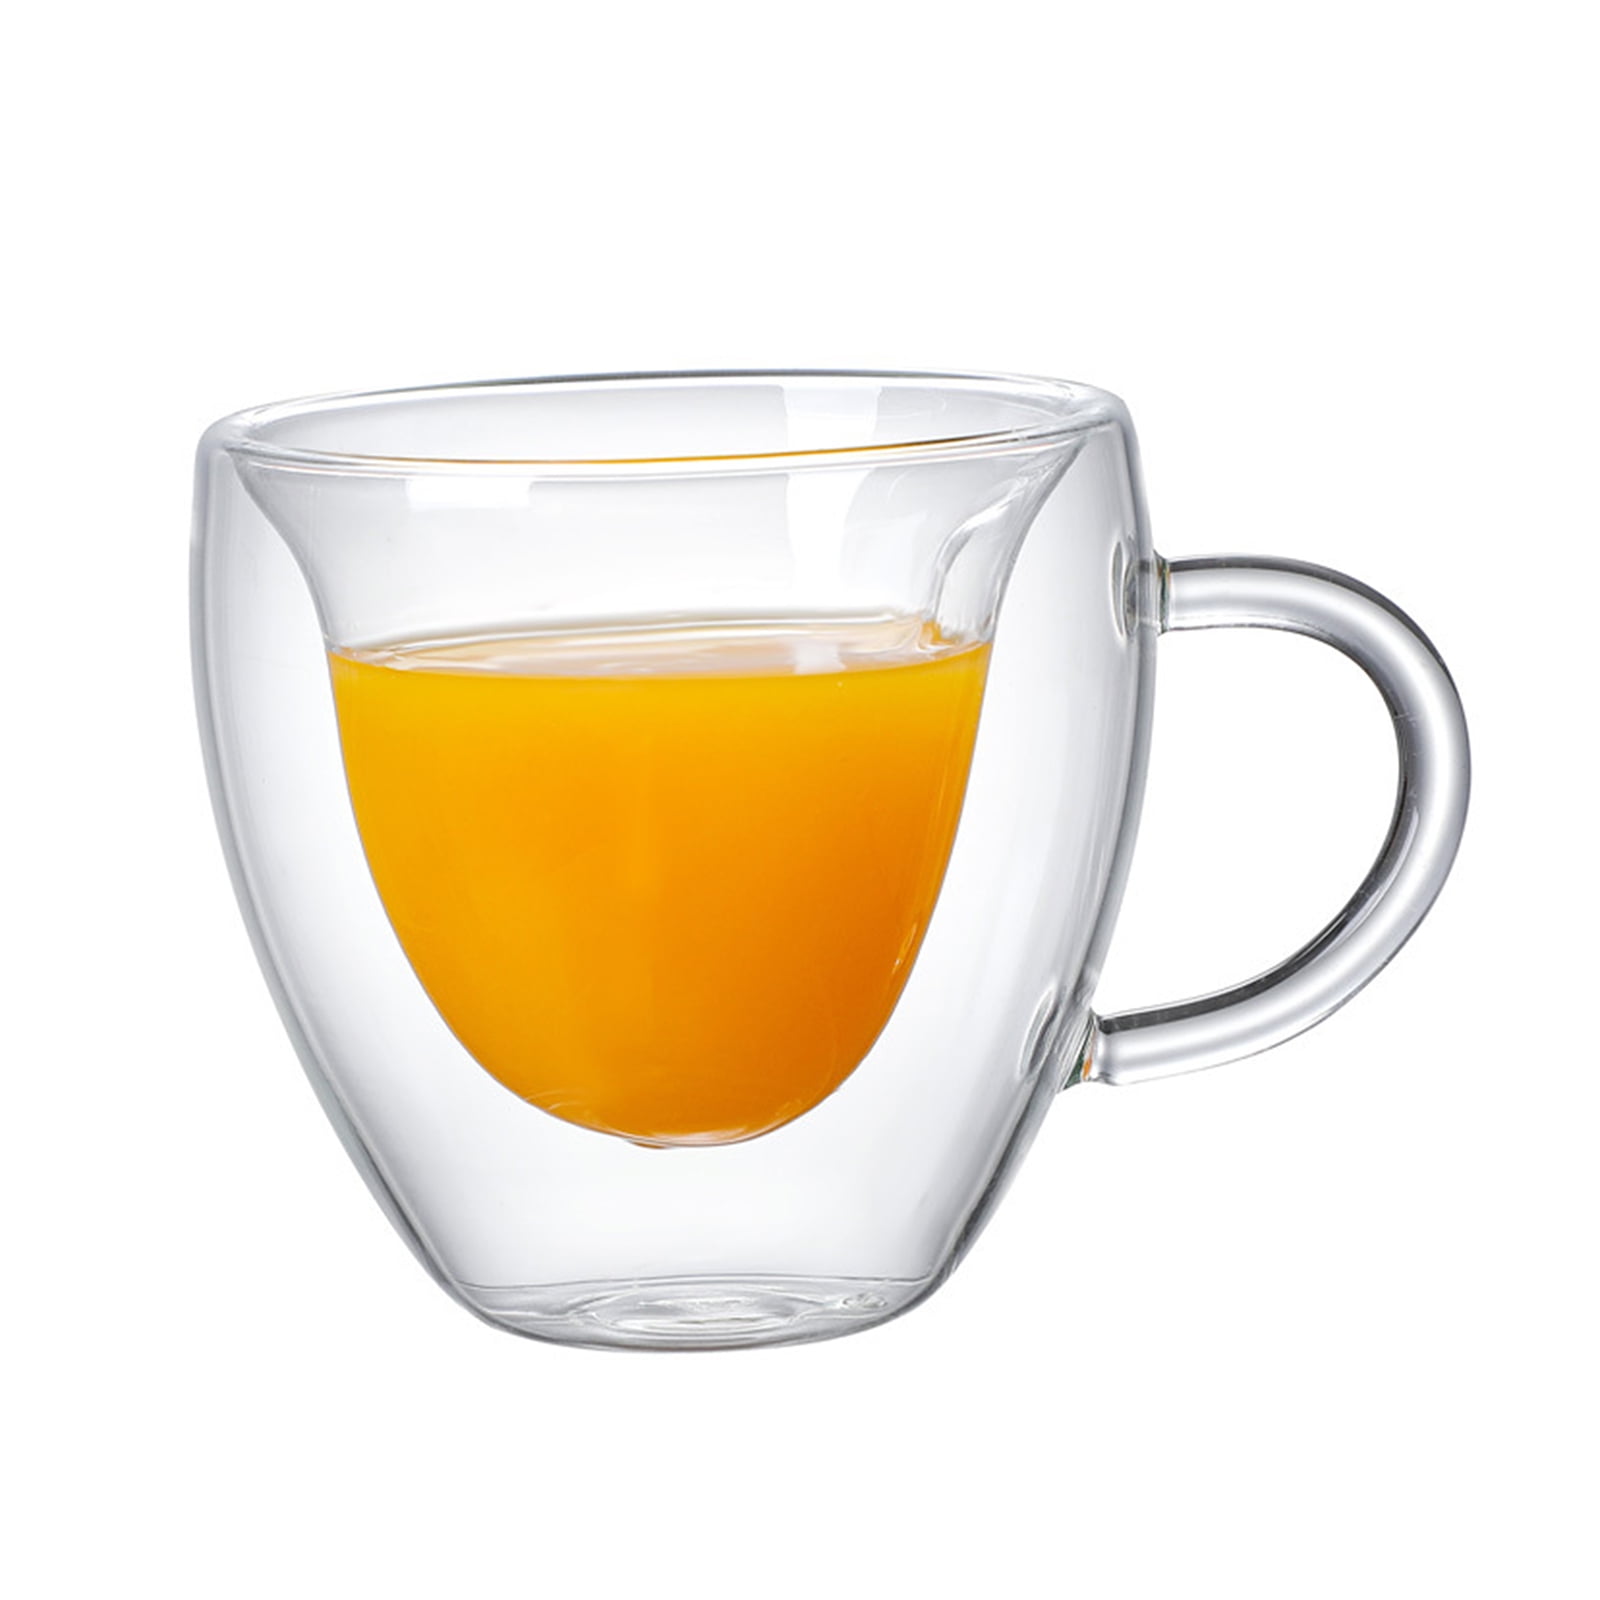 Monfince Clear Glass Cup, Transparent Cup, Glass Coffee Cup, Home Glass Mug  For Juice, Soda, Ice Coffee, Tea